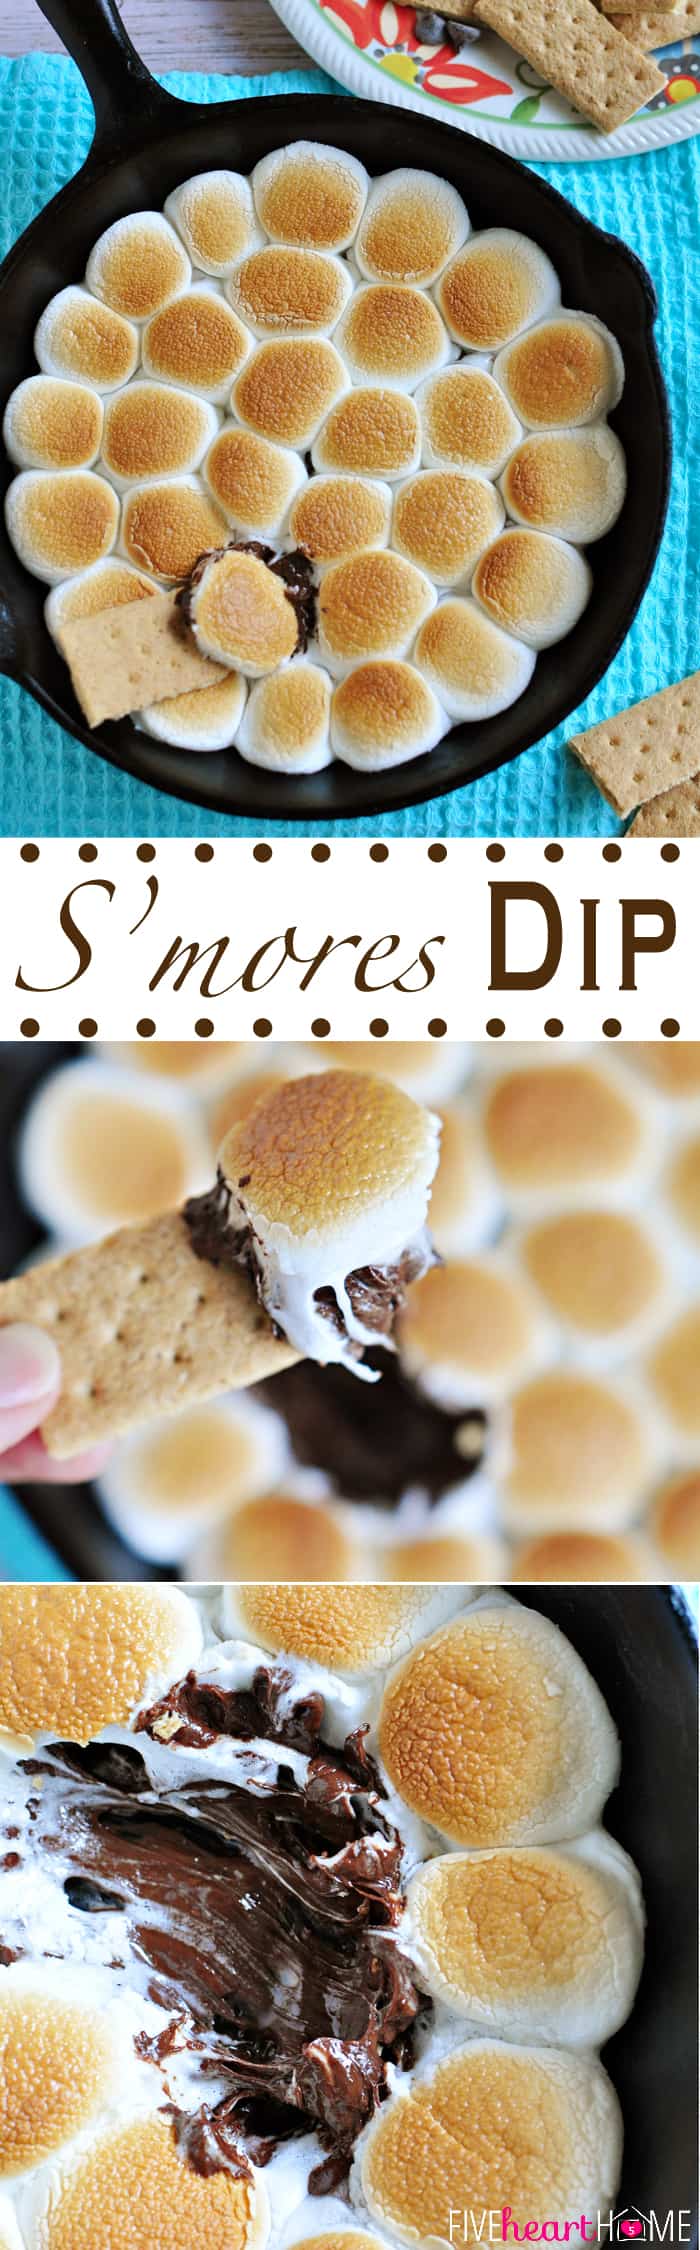 S'mores Dip ~ melted chocolate and toasty marshmallows bake up in a skillet; scoop up with graham crackers for a perfect party dessert! | FiveHeartHome.com via @fivehearthome